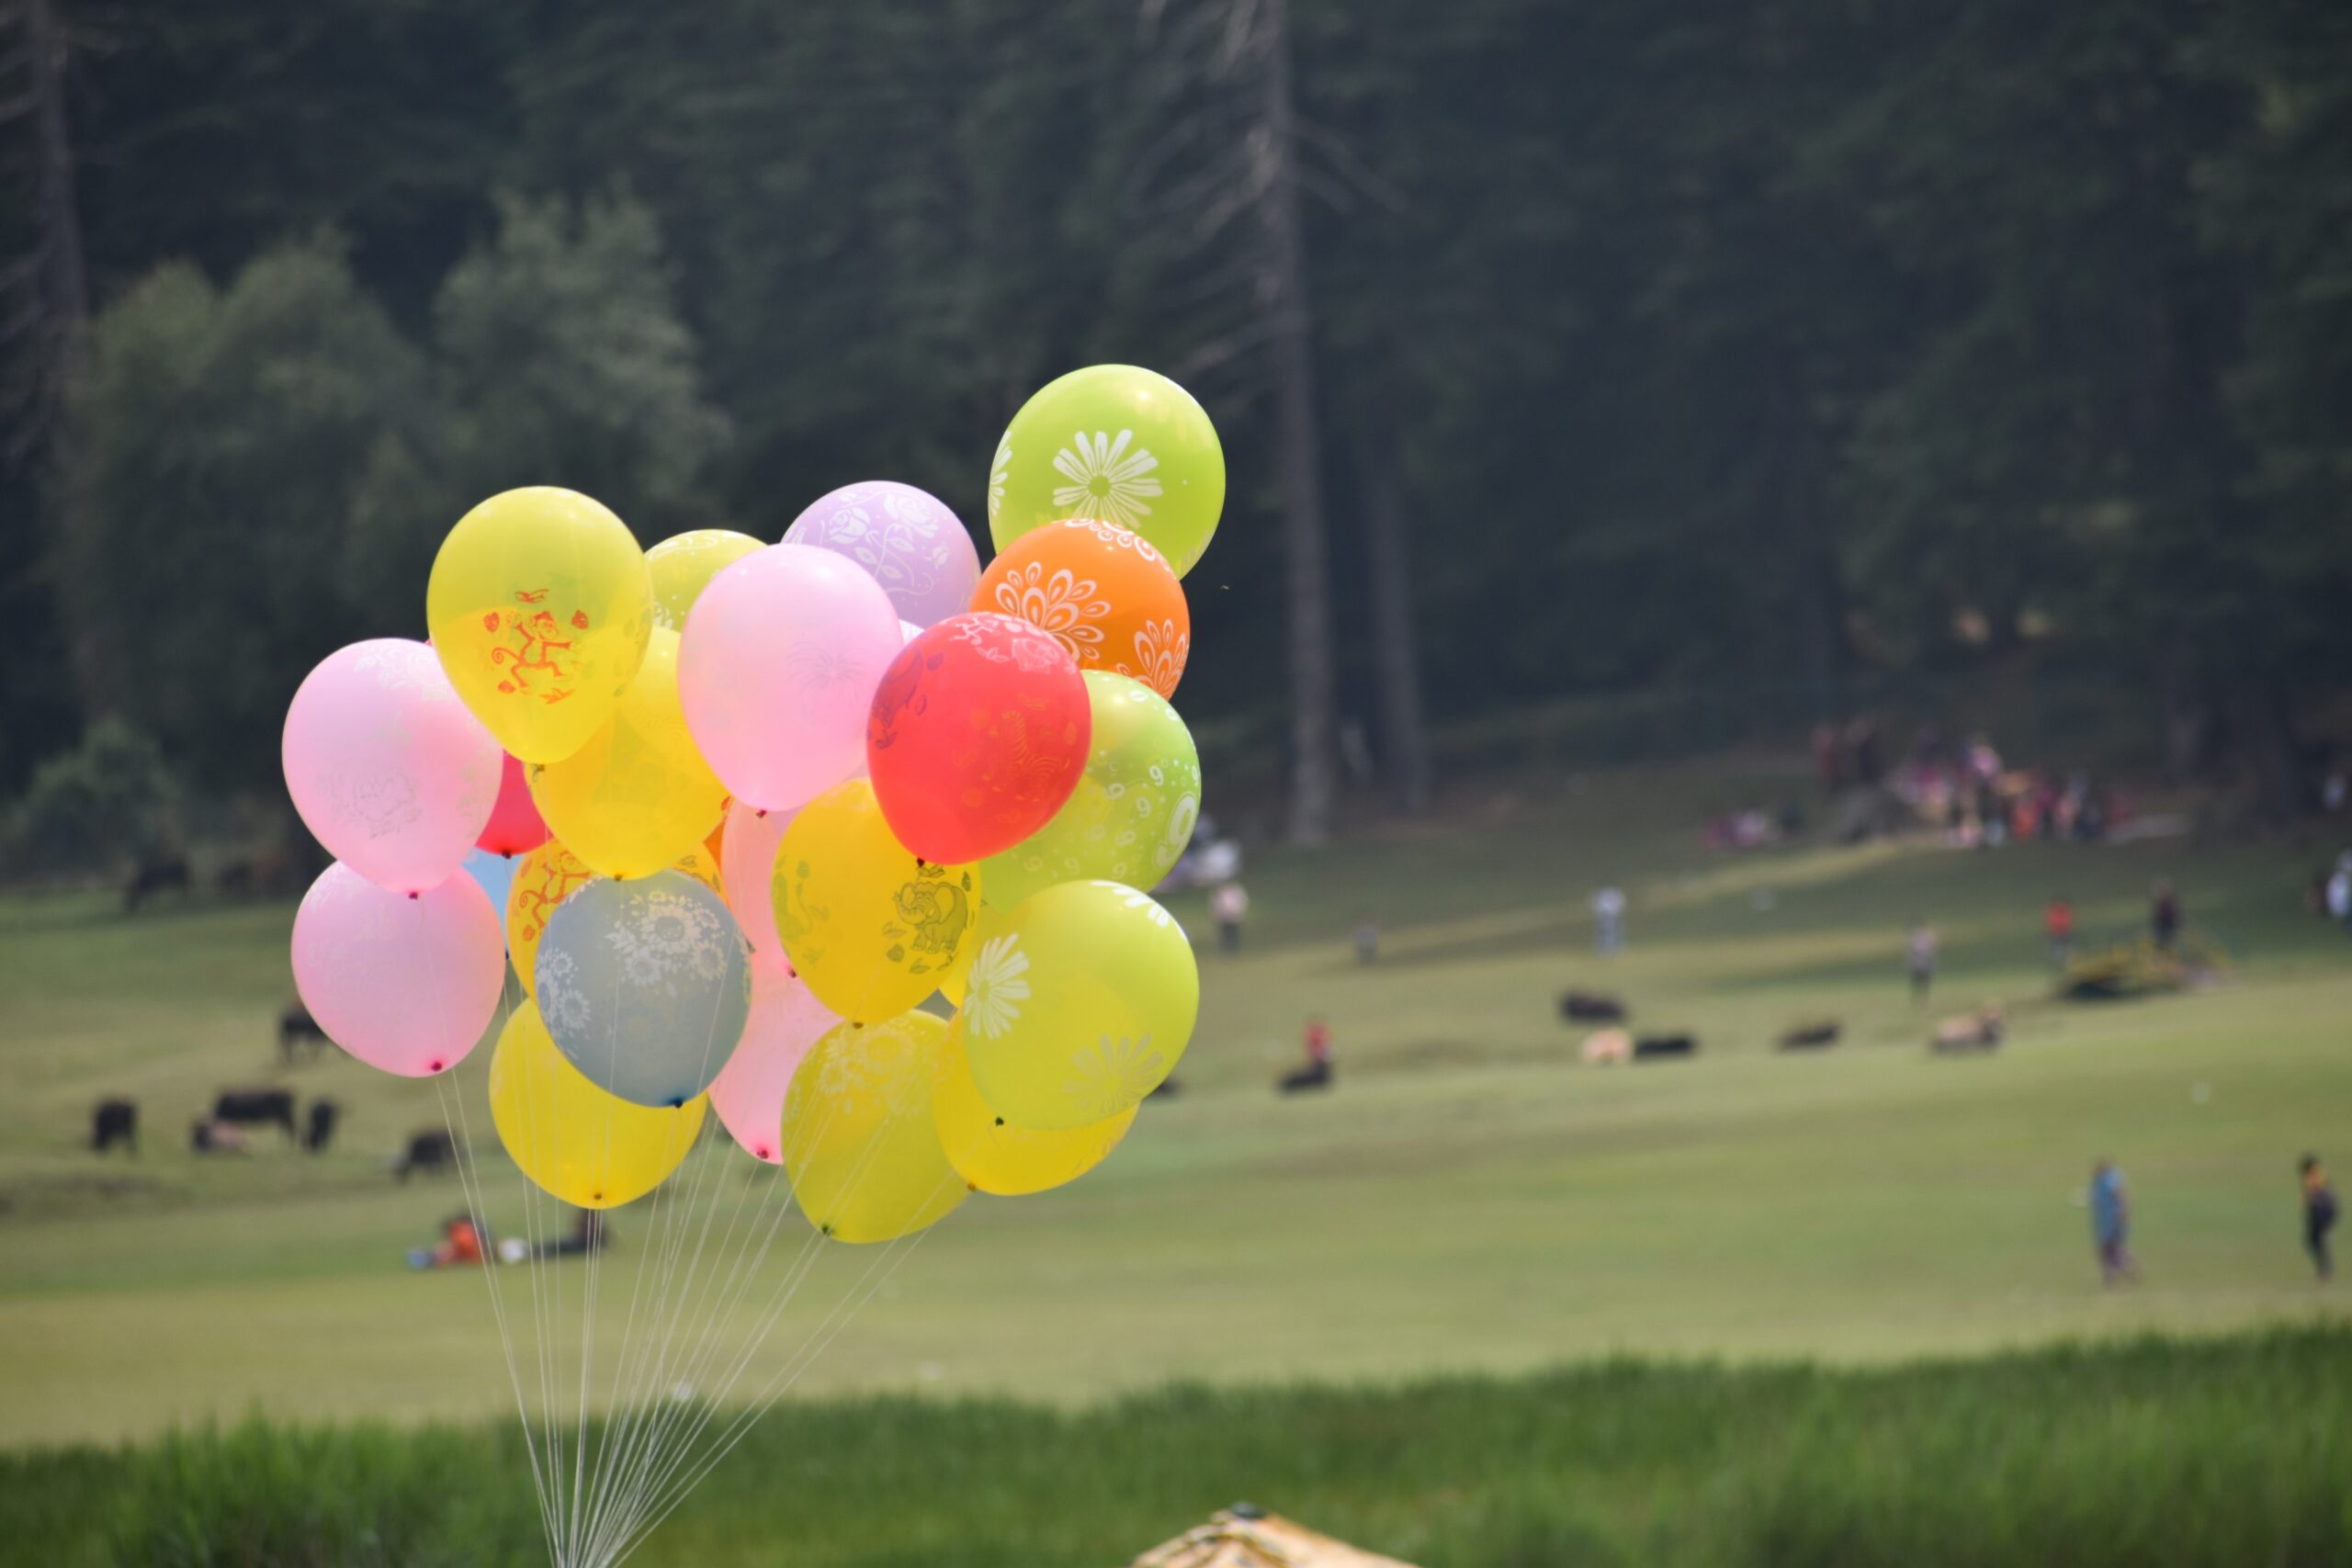 Large cluster of balloons in a park